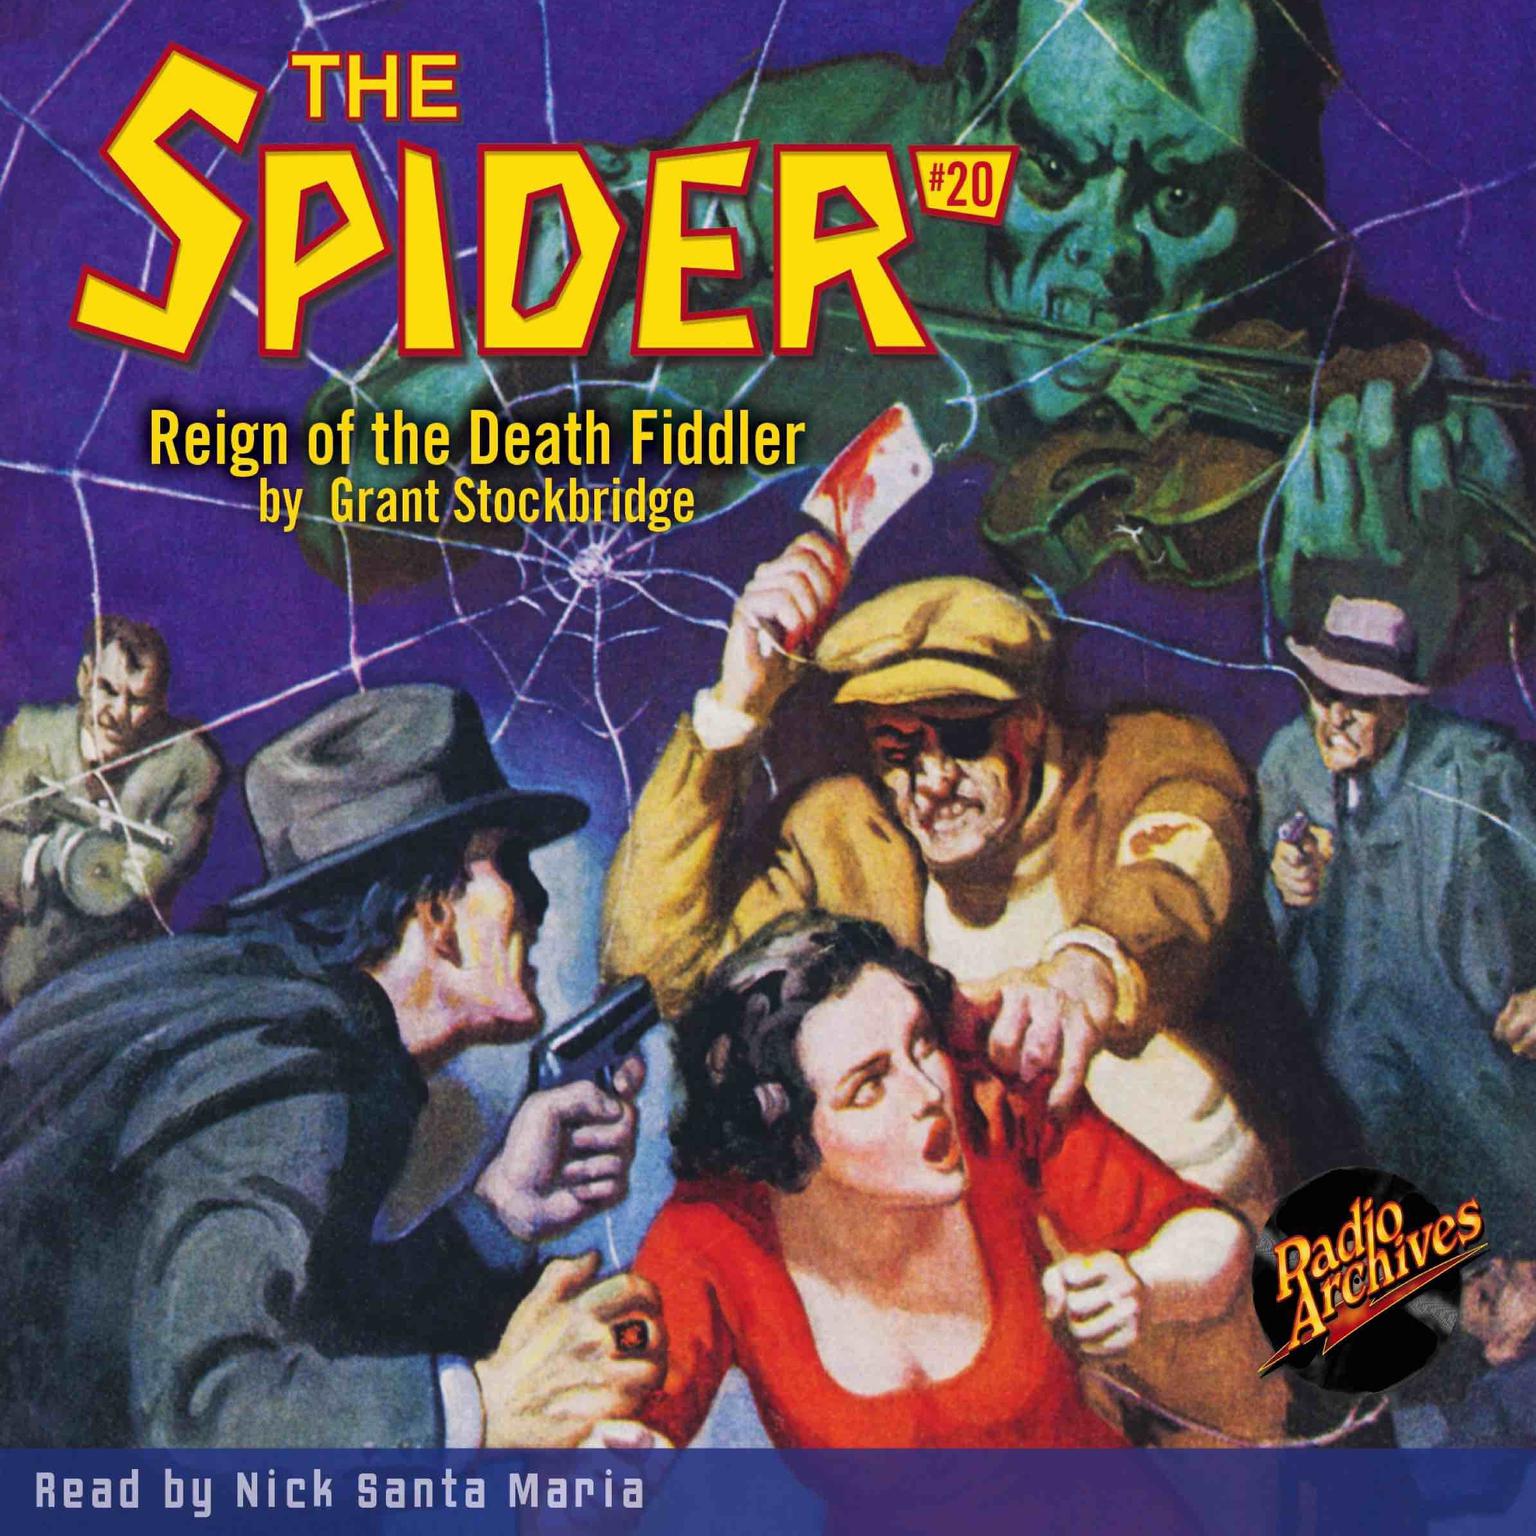 Spider #20, The: Reign of the Death Fiddler Audiobook, by Grant Stockbridge